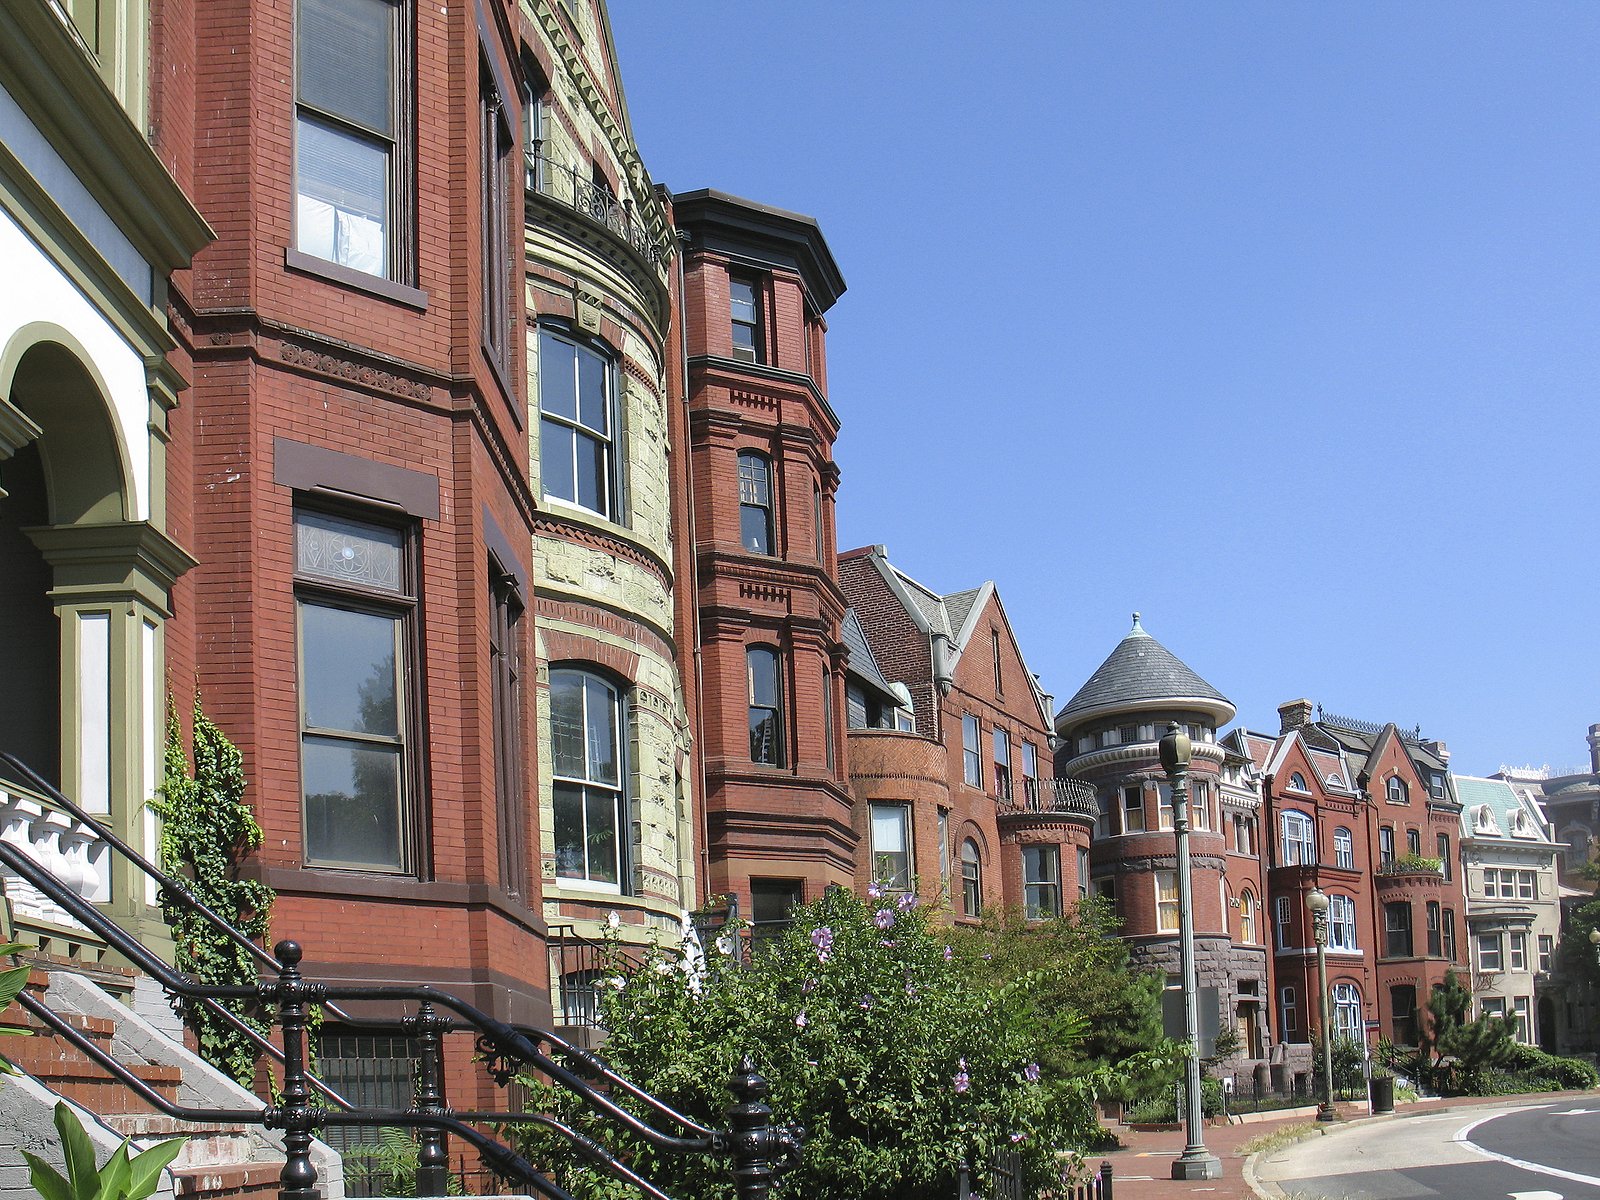 Discover-the-tax-benefits-for-historic-designation-of-your-DC-home-Myrick-CPA-DC